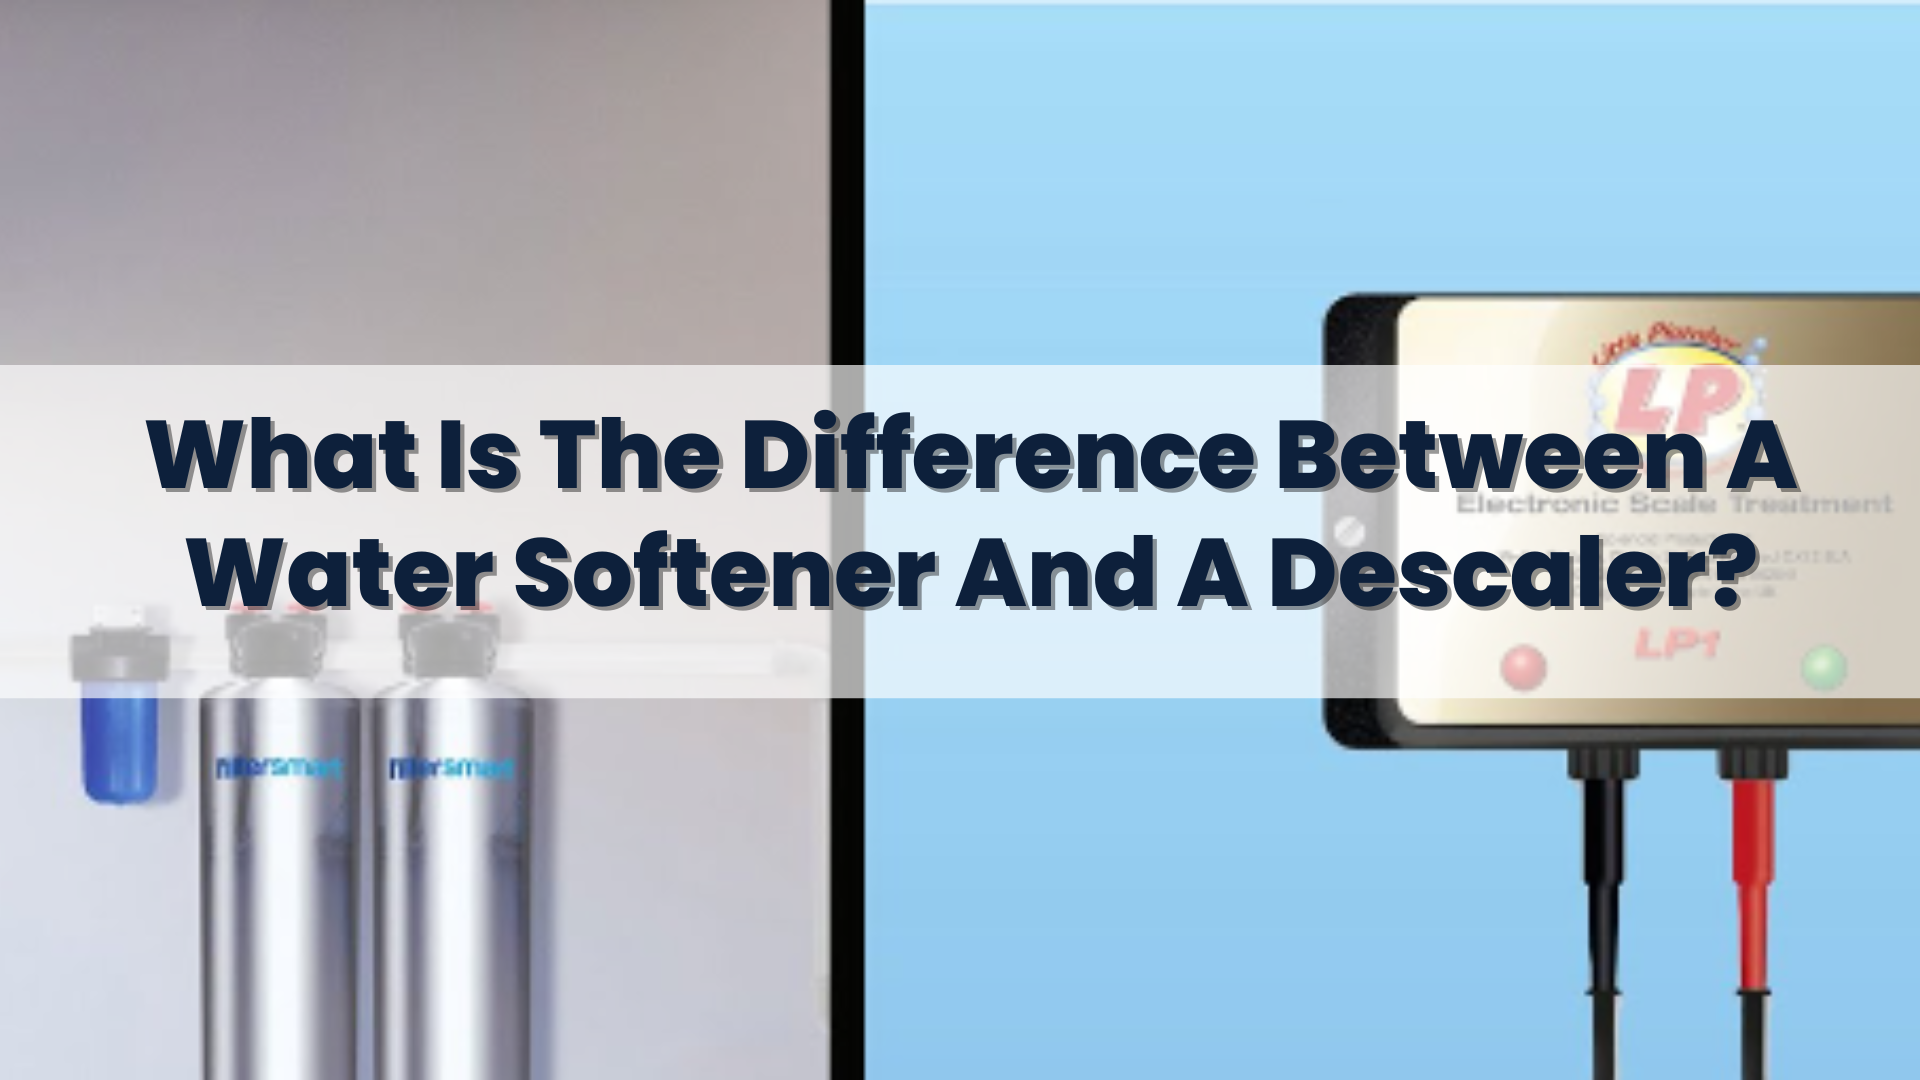 What Is The Difference Between A Water Softener And A Descaler